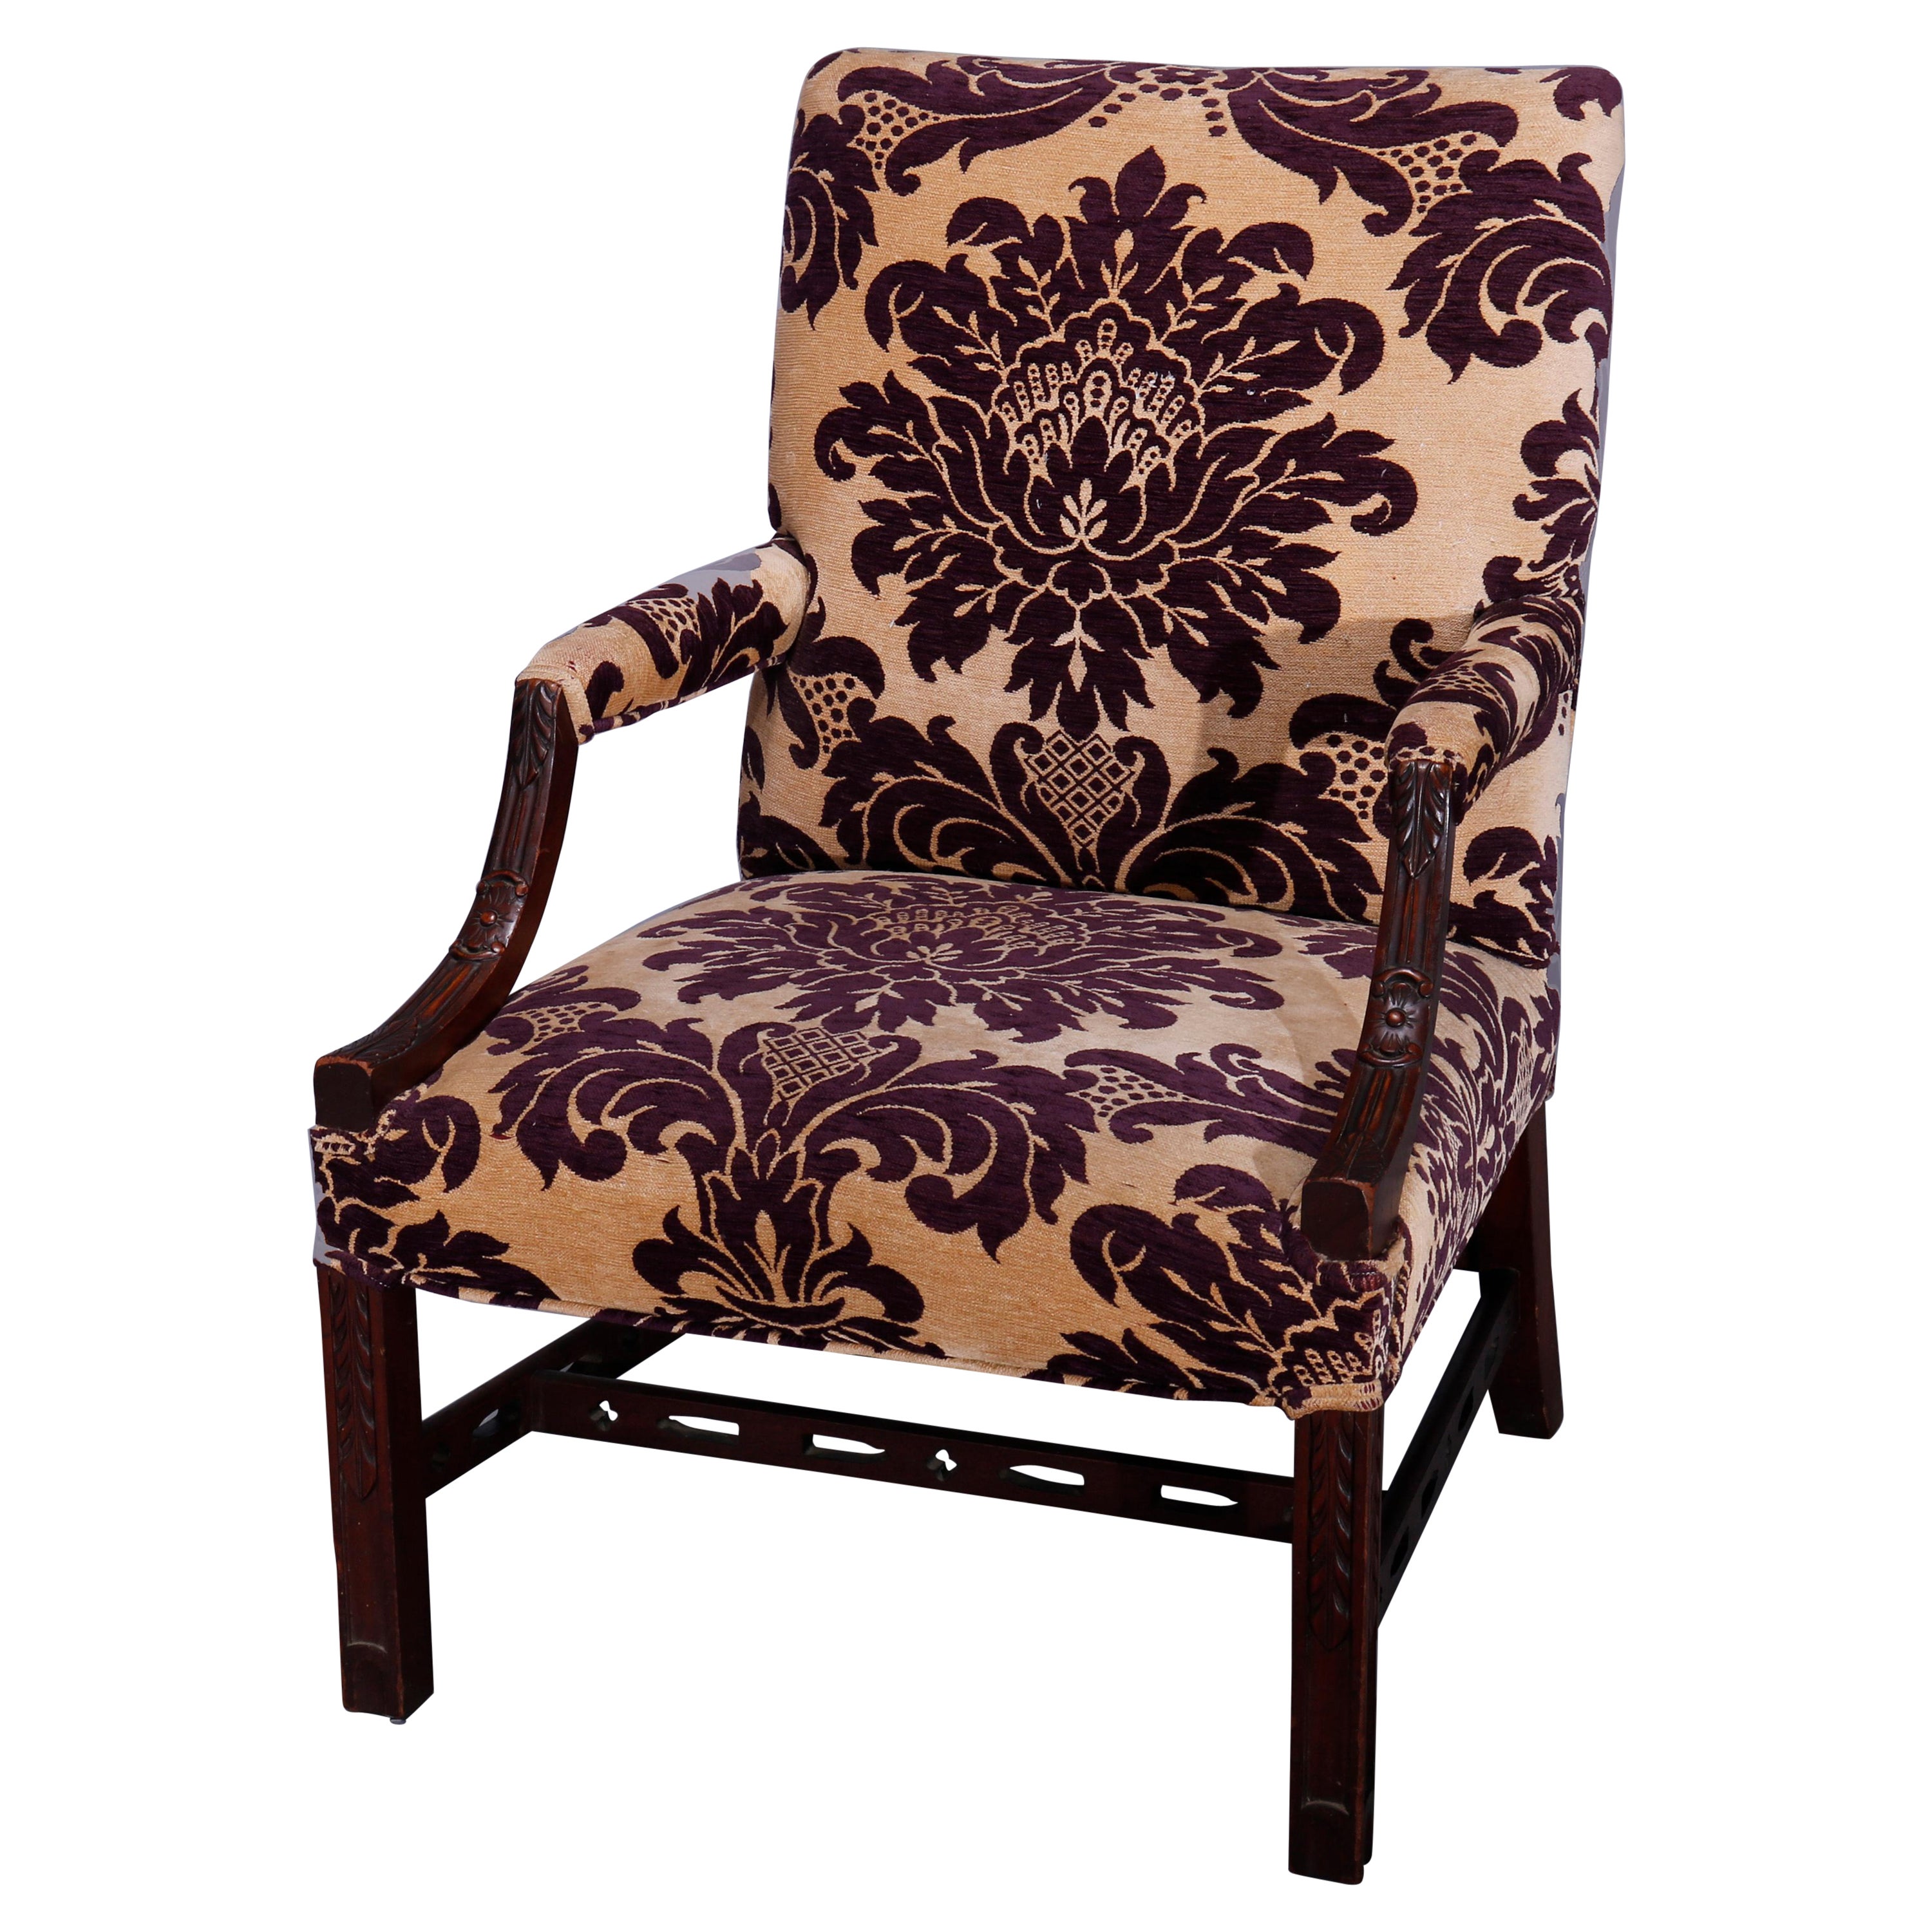 Antique English Georgian Style Upholstered Mahogany Lolling Chair, circa 1920